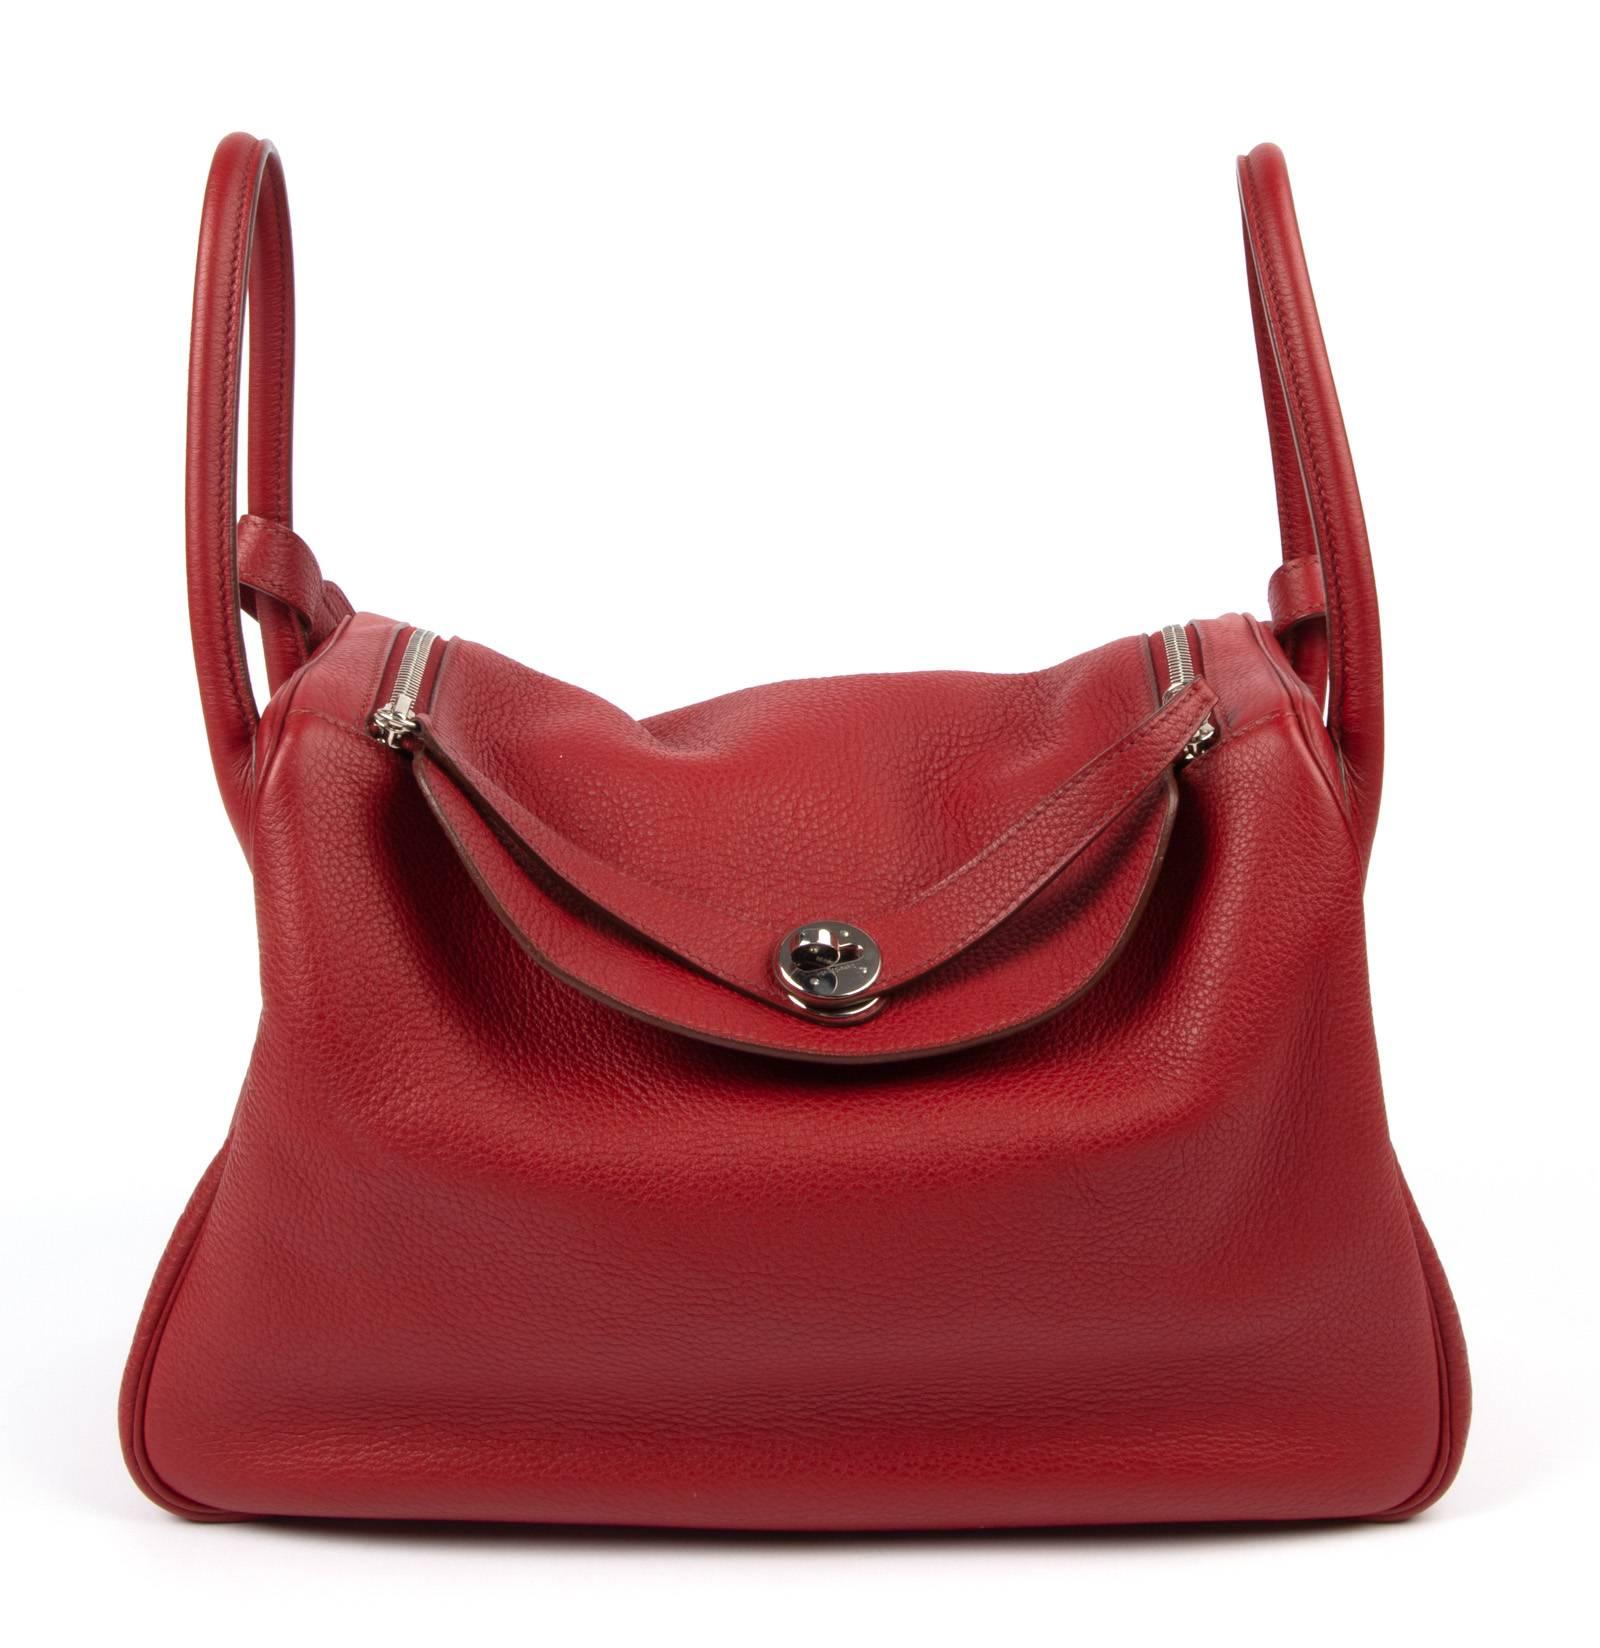 Beautiful rich Rouge Hermes Lindy 34 Bag.
Carry by hand, or shoulder, and the bag changes it whole look in one move! 
Spacious interior with a interior pocket on each side. 
Top has two zippers for easy closure - and you can easily wear the zippers